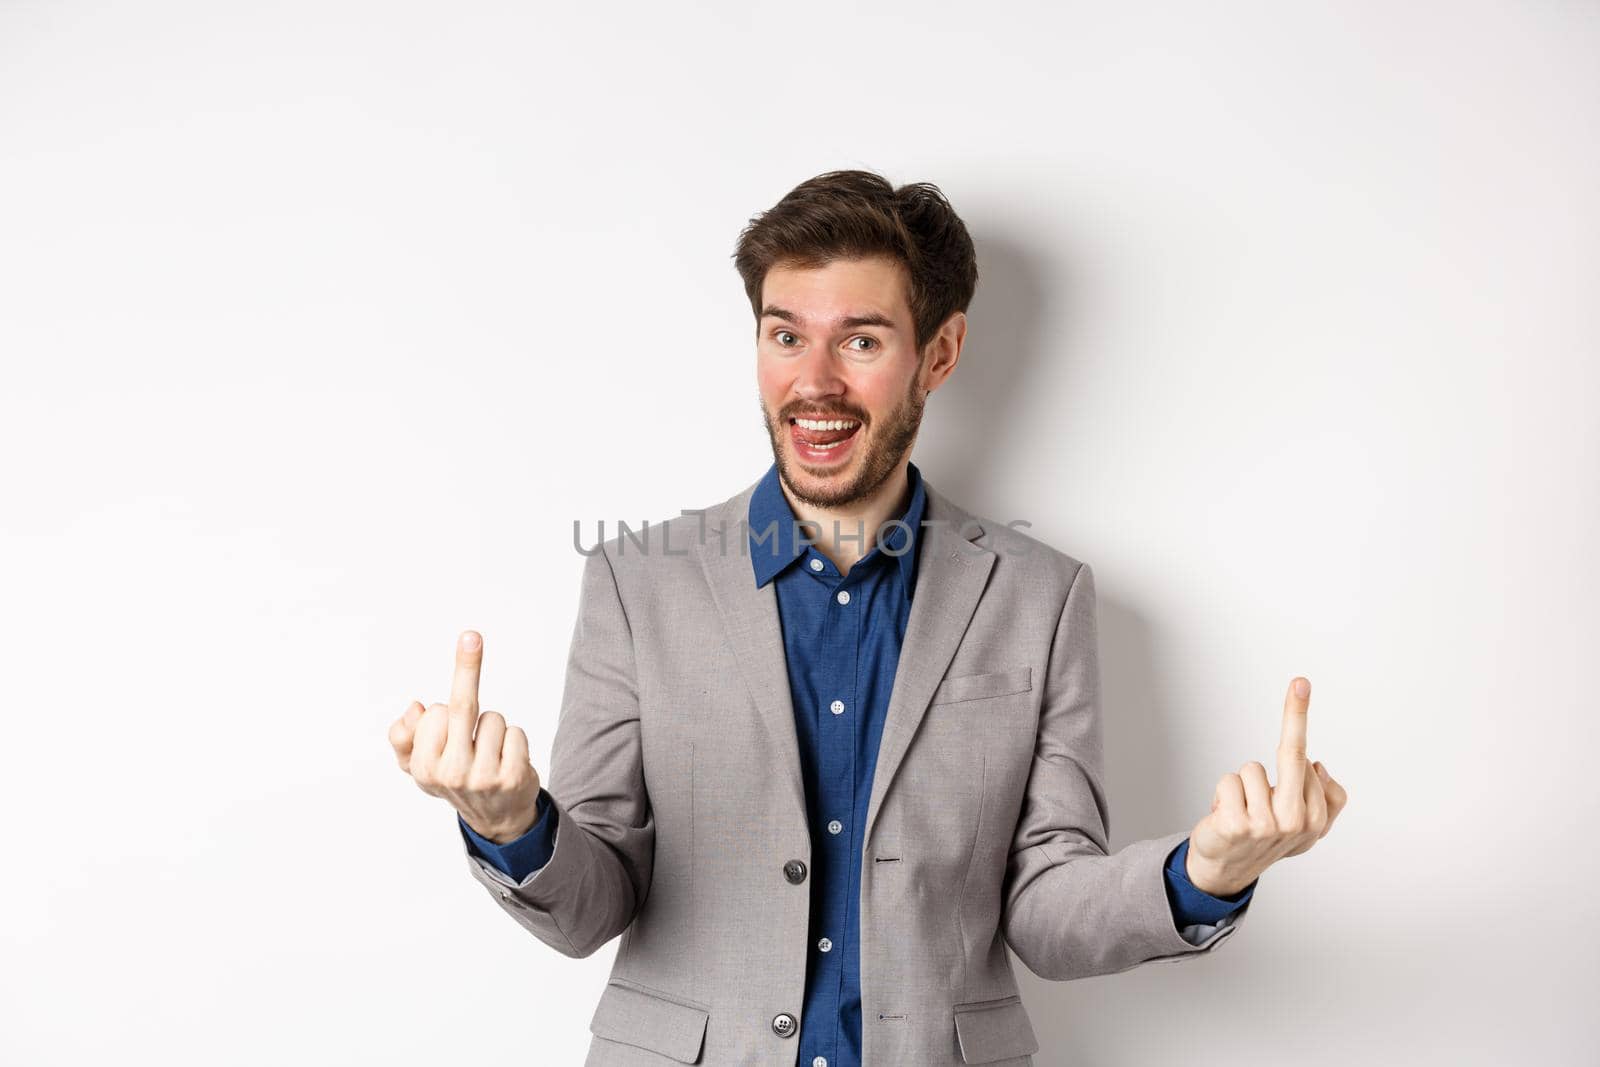 Rude ignorant guy in business suit showing middle fingers and tongue, smiling while mocking people, fuck you gesture, standing on white background.